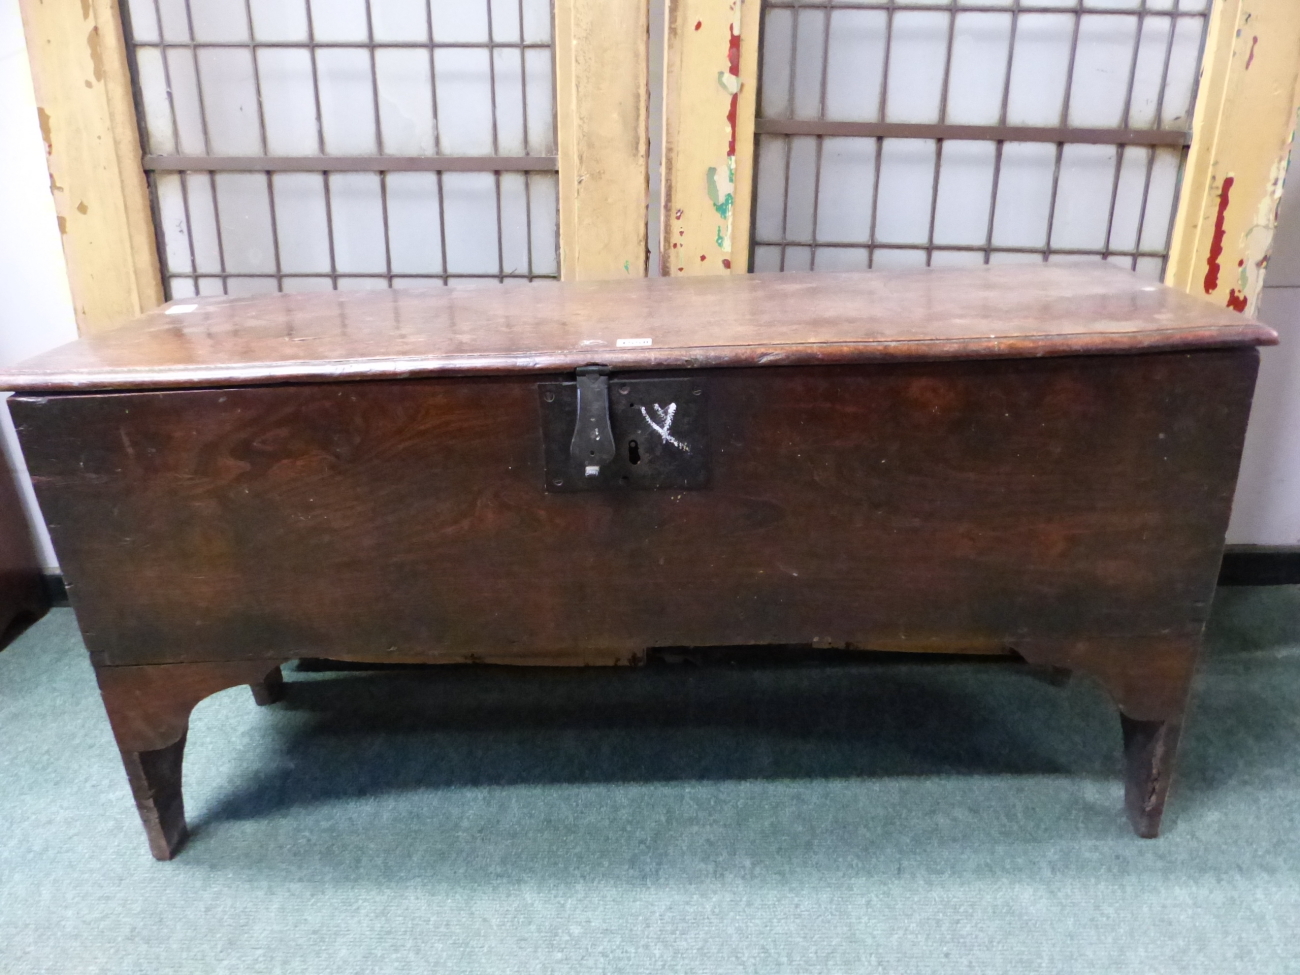 AN EARLY 18th C. OAK PLANK SIDED COFFER, THE NARROW SIDES CARVED WITH AN ARCH TO FORM THE LEGS AND